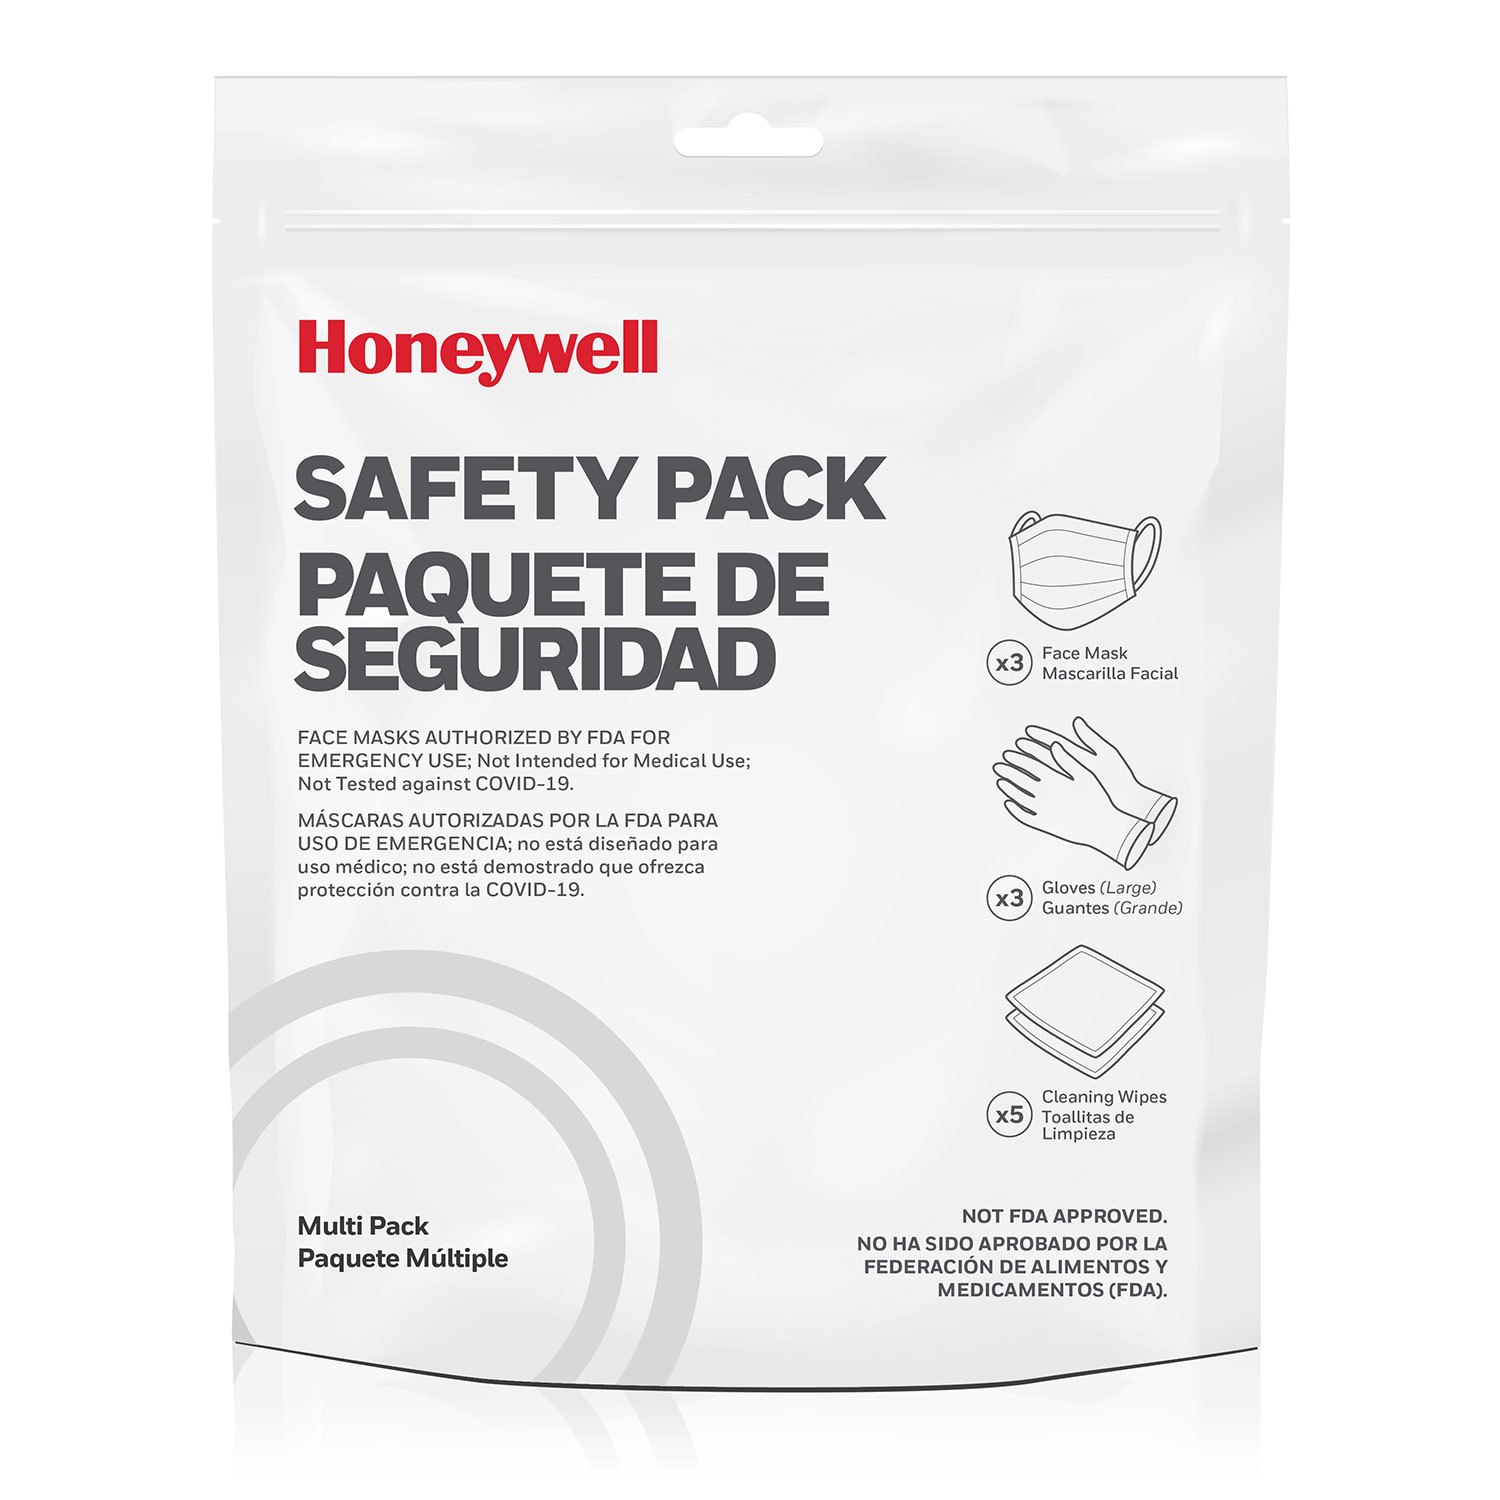 Honeywell Safety Multi Pack - 3 Face Masks, 3 Gloves & 5 Cleaning Wipes - RWS-50101